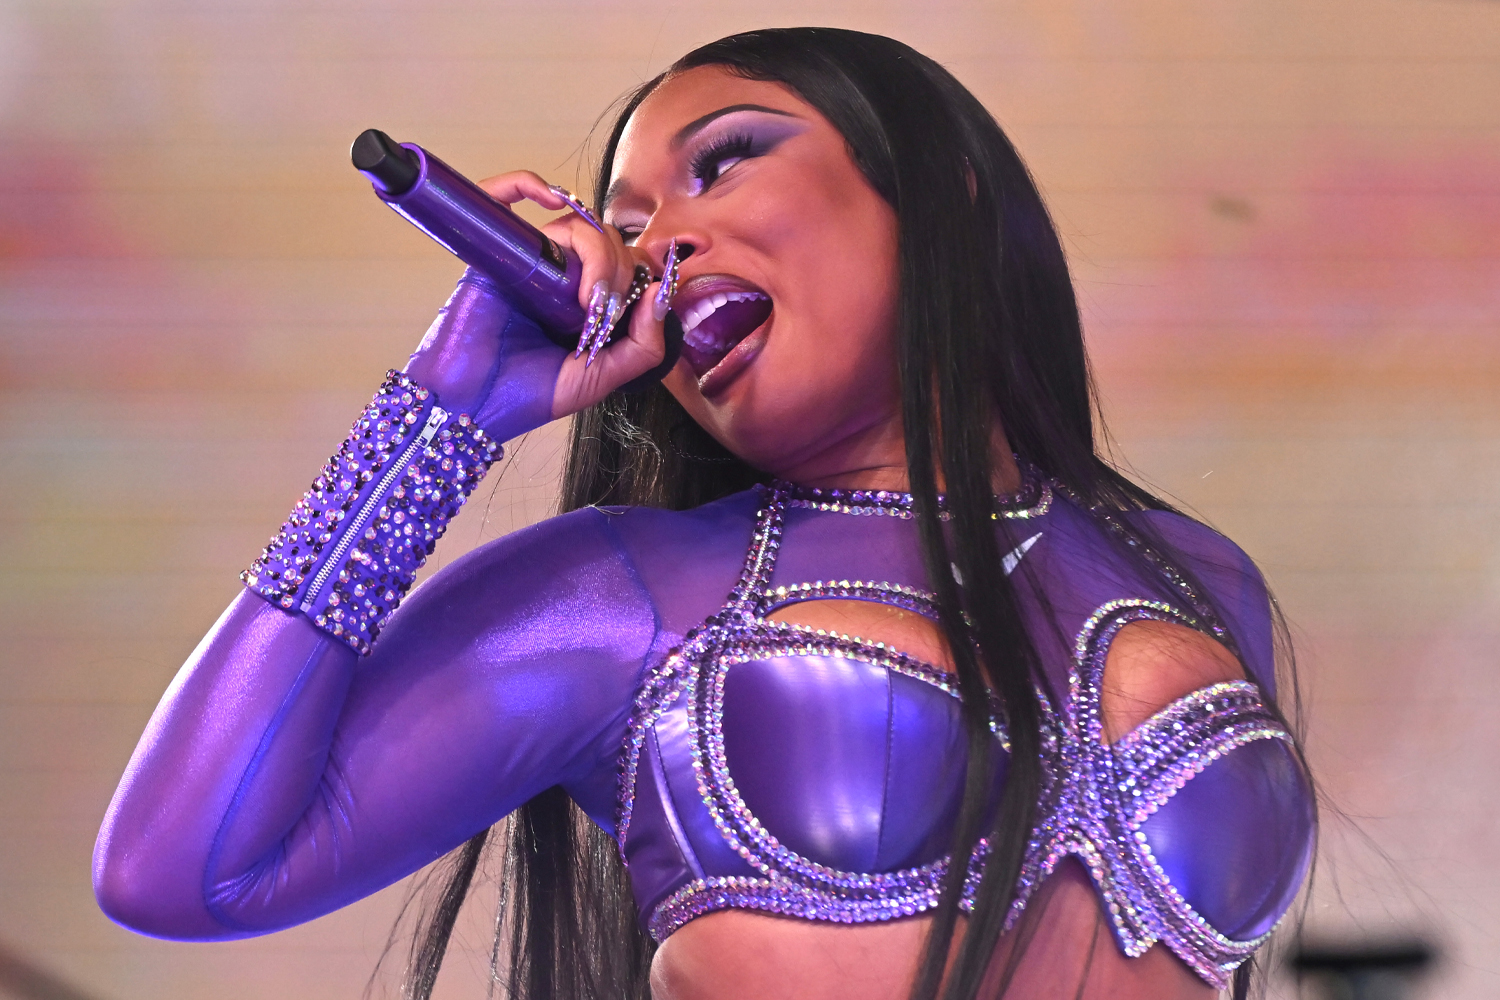 Score your Hot Girl Summer Tour tickets now! Megan Thee Stallion general sale starts today – grab yours before prices go up!